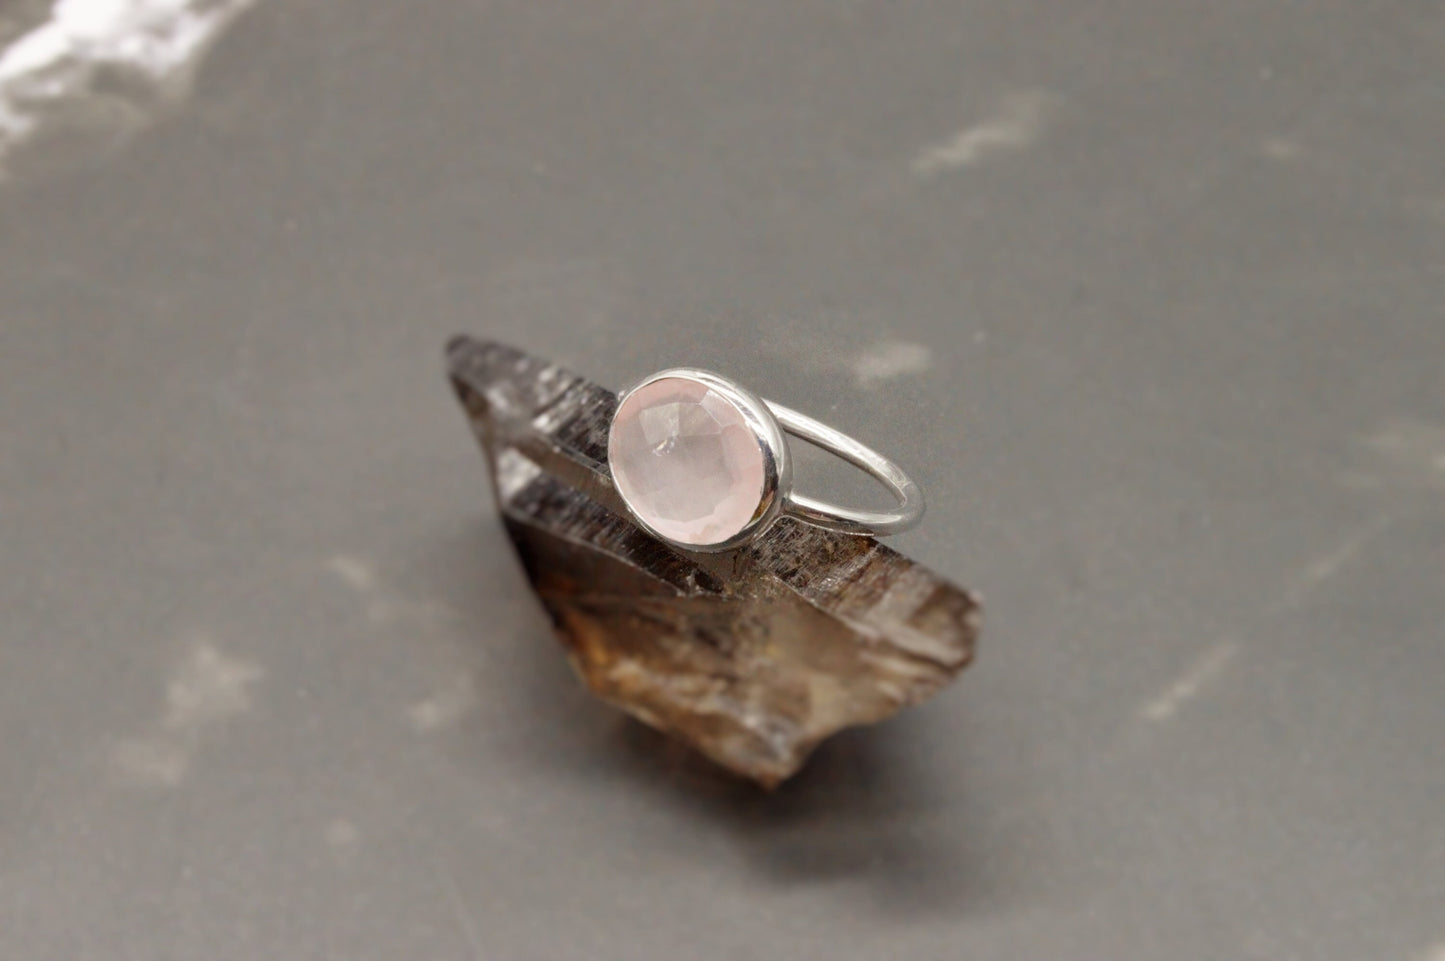 Big Rose Quartz Ring, Sterling Silver Ring, Rose Quartz Jewelry, Pink Rings, Statement Rings, Gift For Her, UK size Q 1/2, Heart Chakra Ring